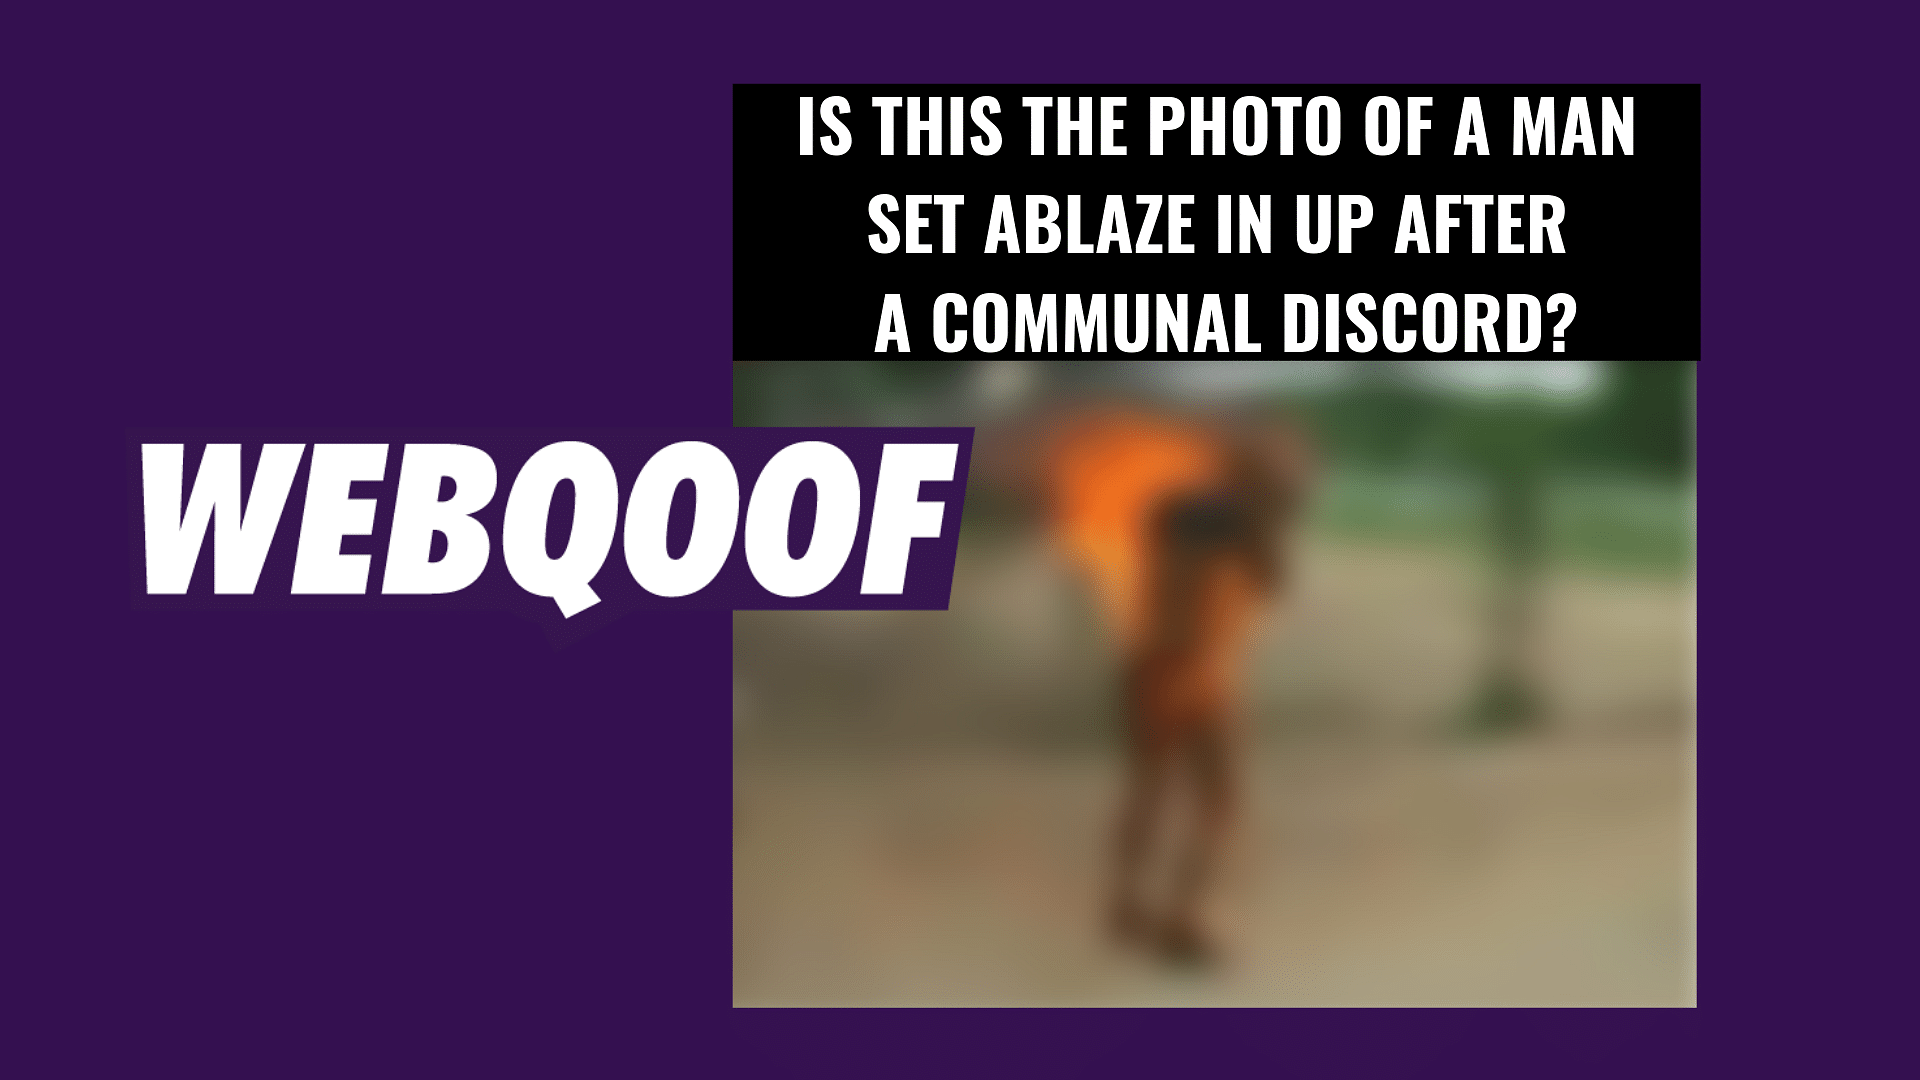 UP’s Gonda Viral Photo Fact Check: The image being circulated dates back to 2013.